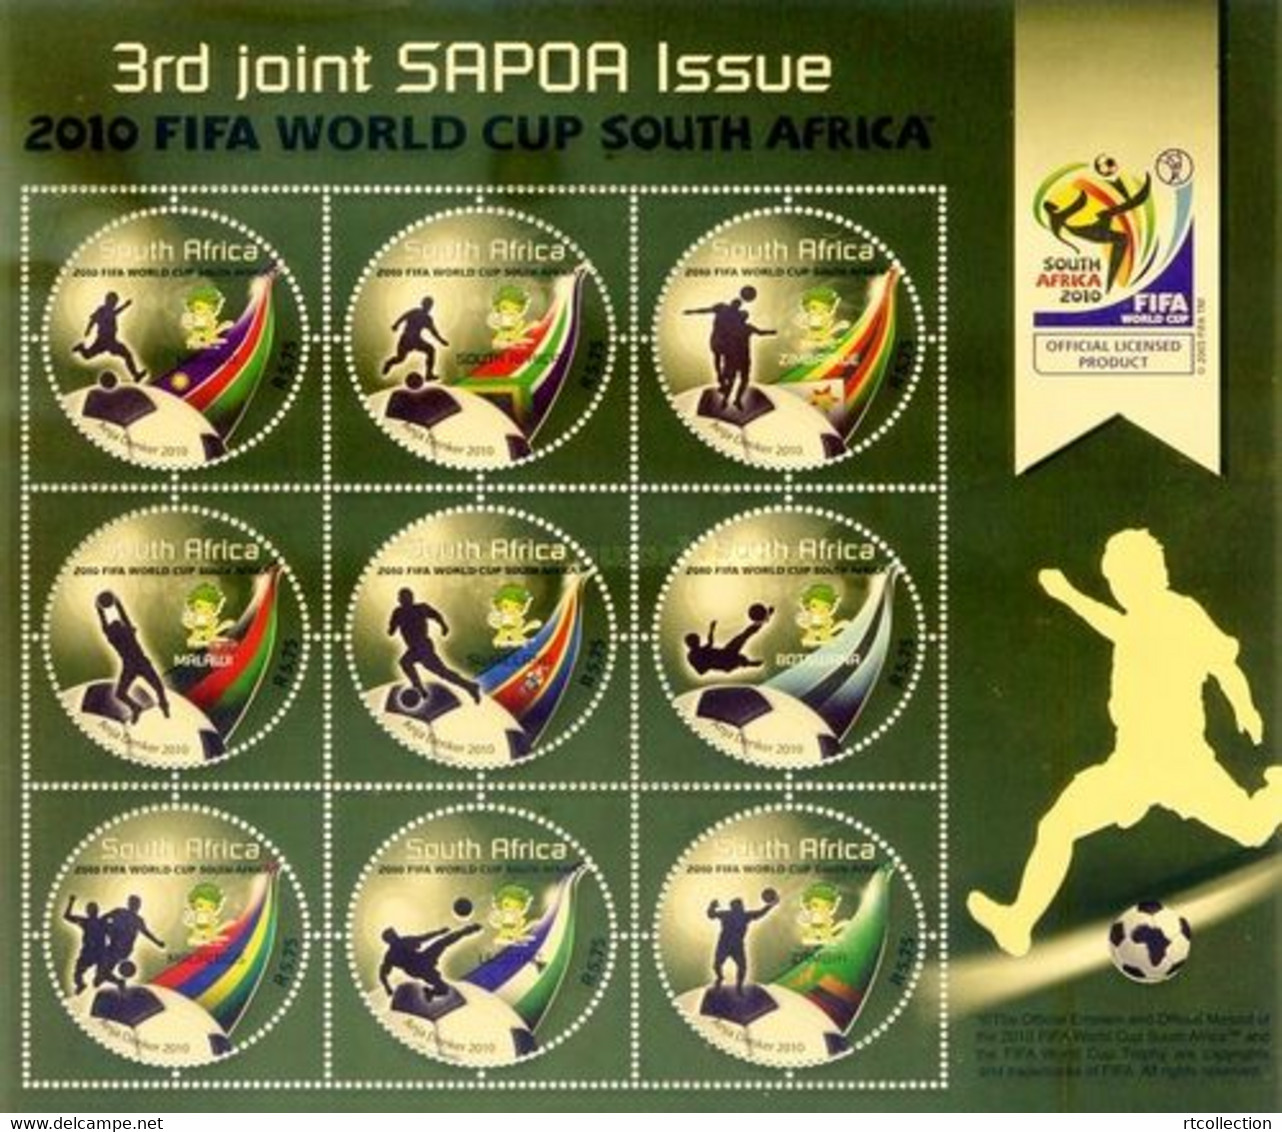 South Africa RSA 2010 Sheet 3rd Joint SAPOA Issue FIFA World Cup Football Game Soccer Sports Round Shap Stamps MNH - Nuevos